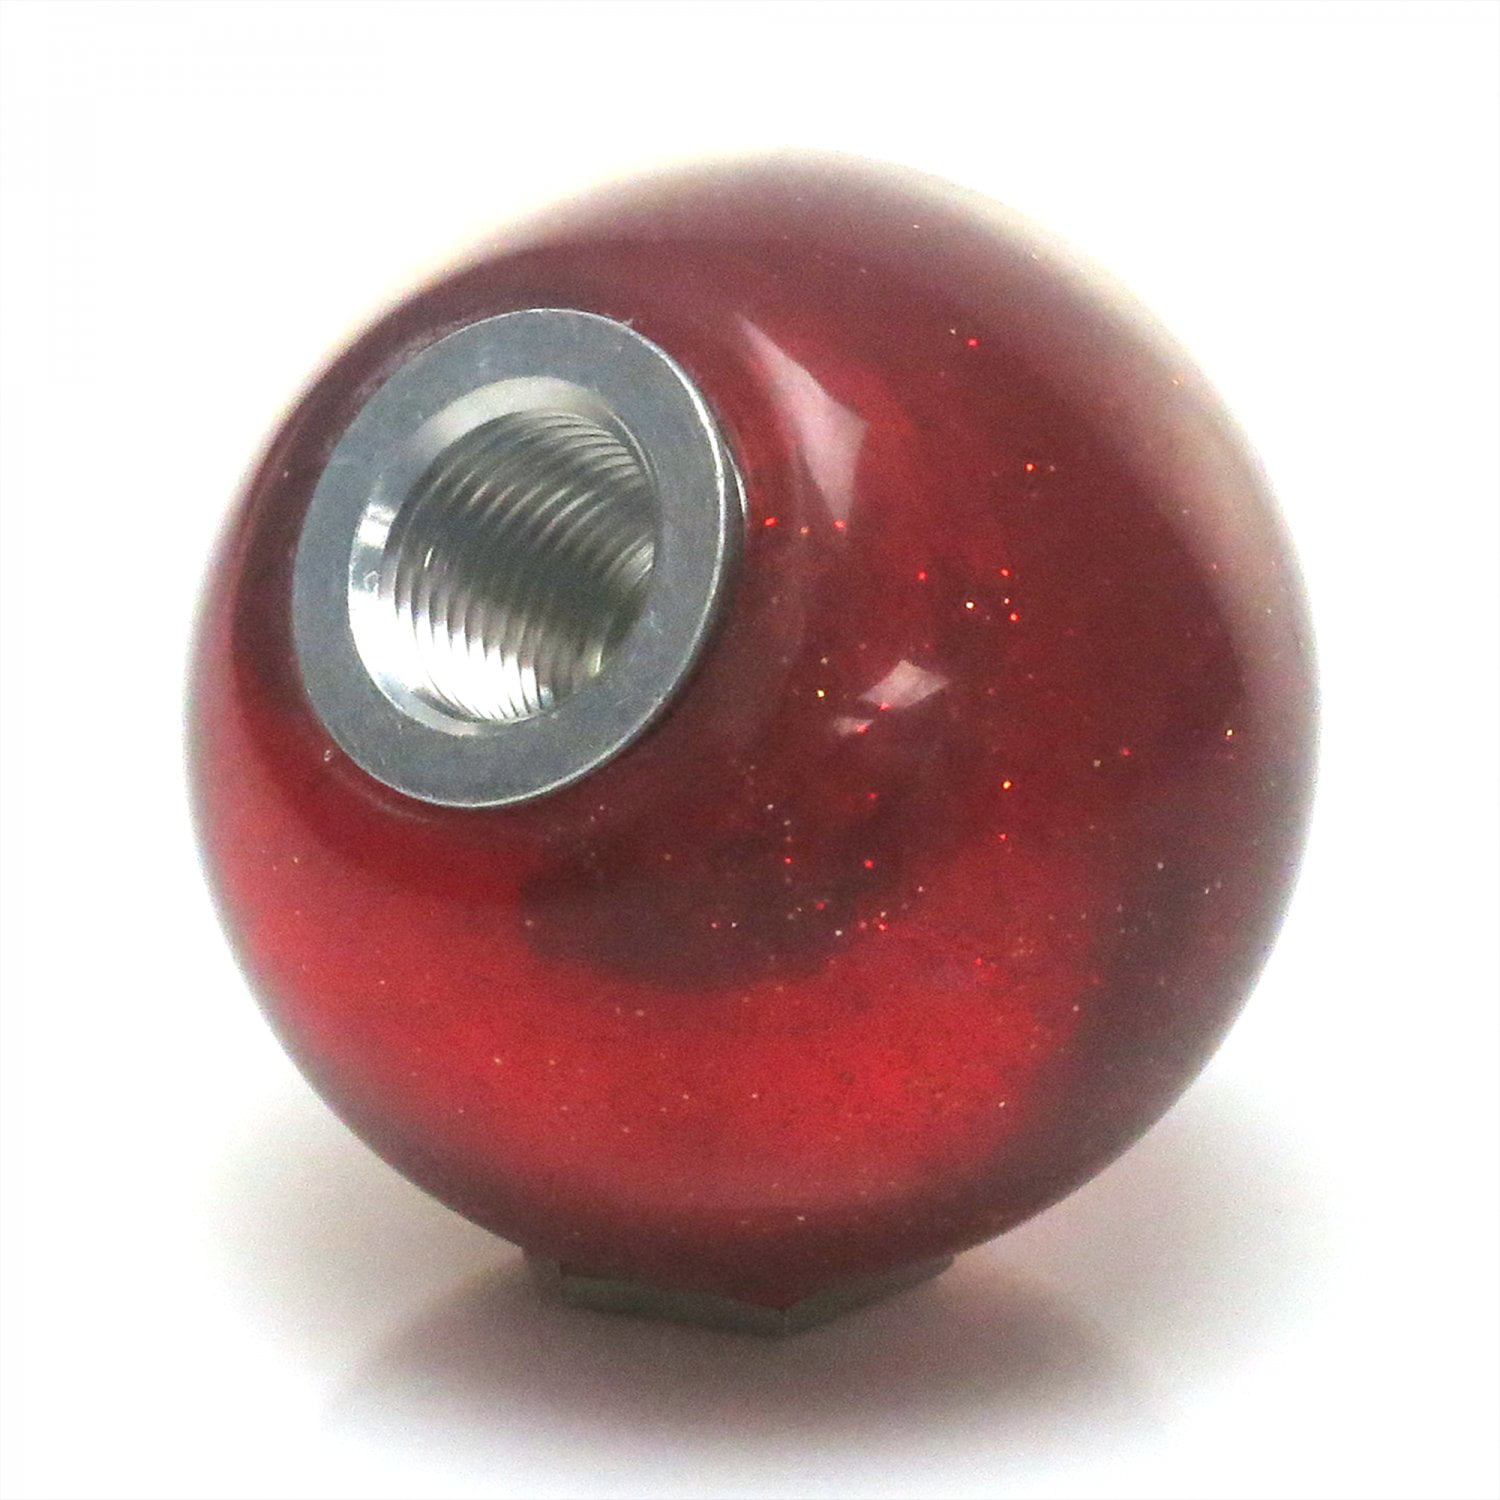 American Shifter 47483 Red Metal Flake Shift Knob with 16mm x 1.5 Insert Orange Ball #4 